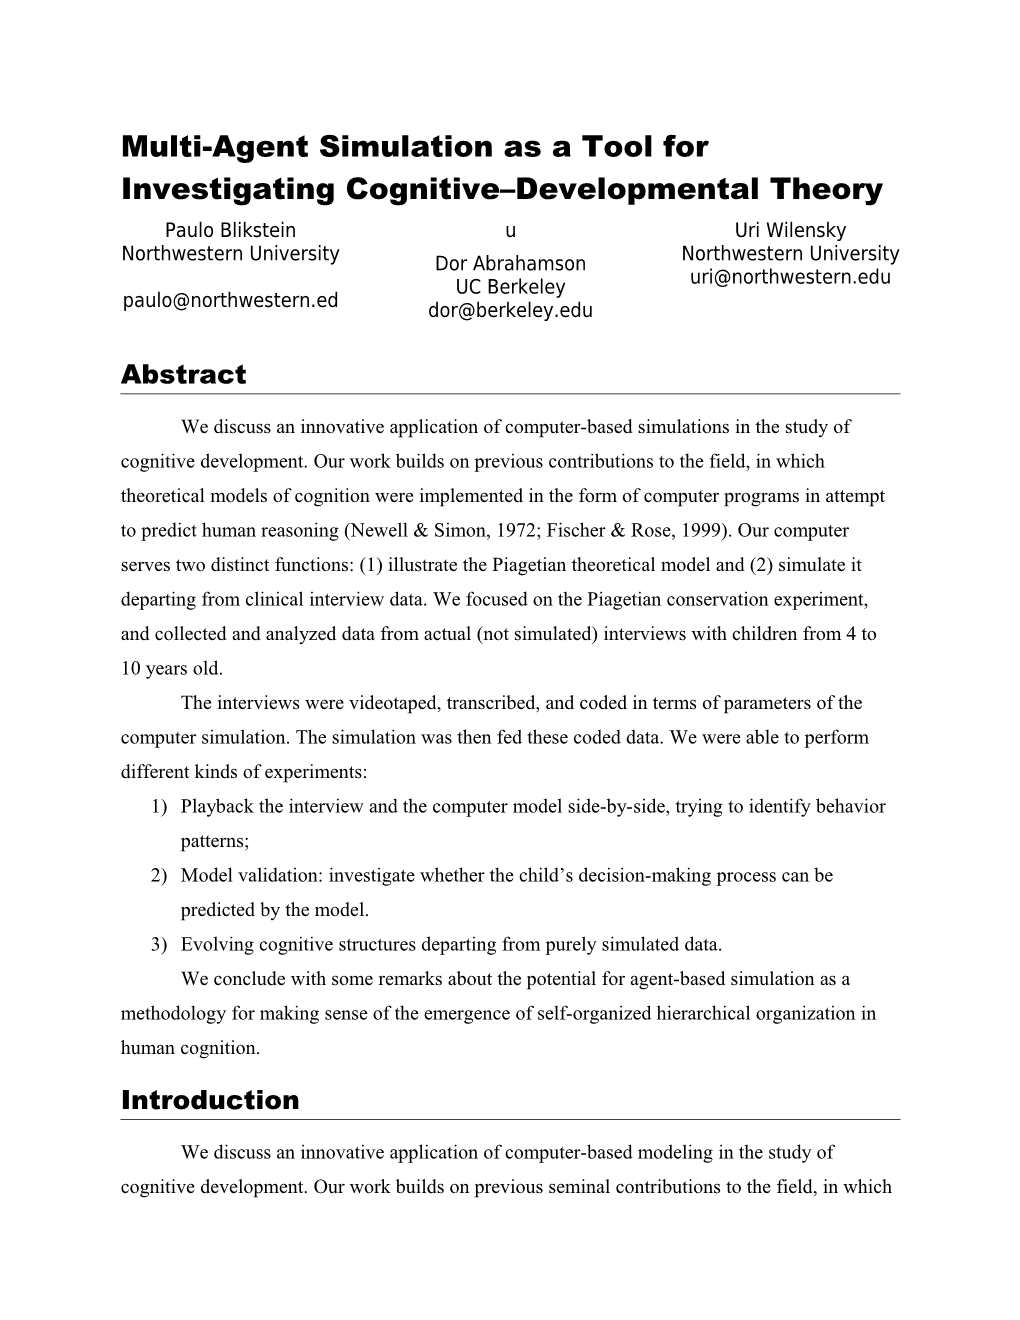 Multi-Agent Simulation As a Tool for Investigating Cognitive Developmental Theory